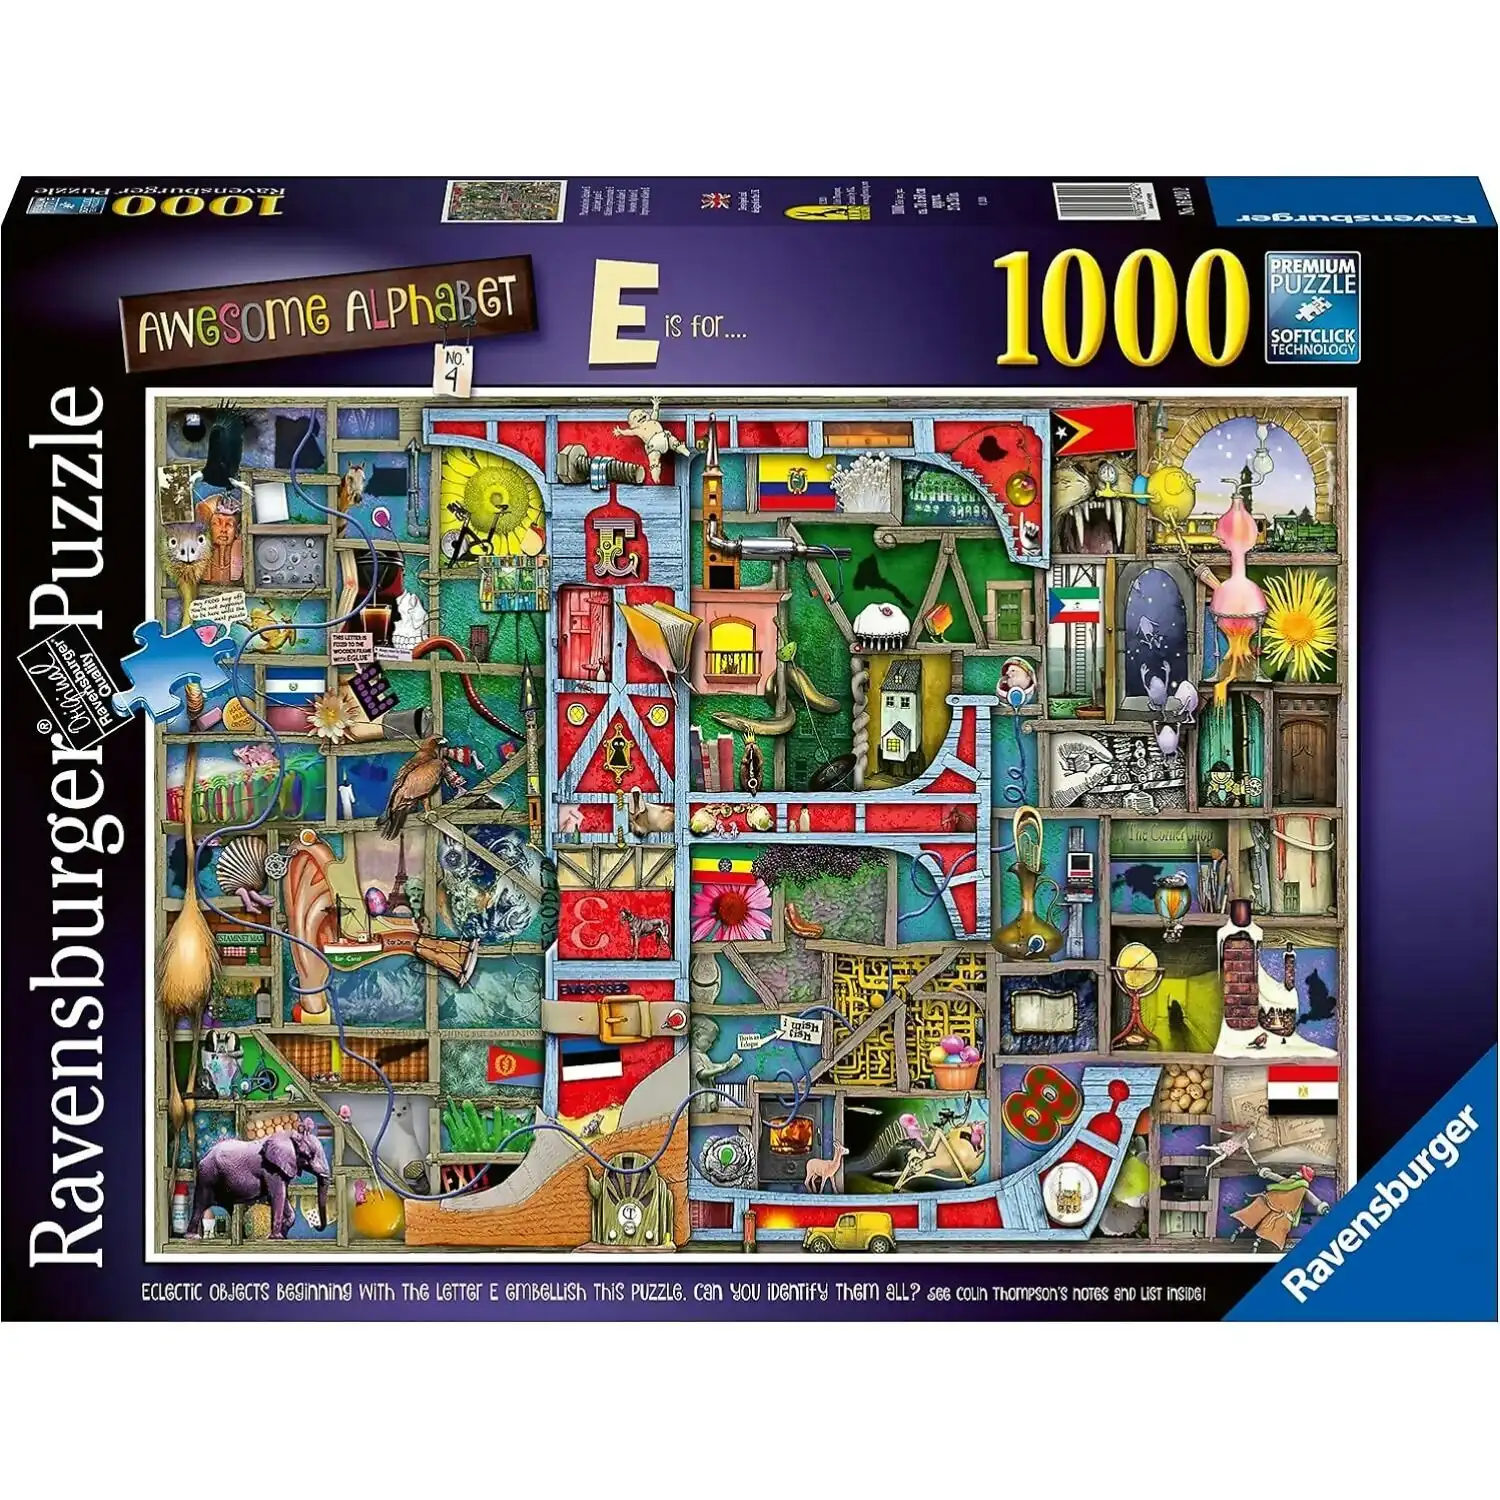 Ravensburger - Awesome Alphabet - E Is For - Jigsaw Puzzle 1000pc